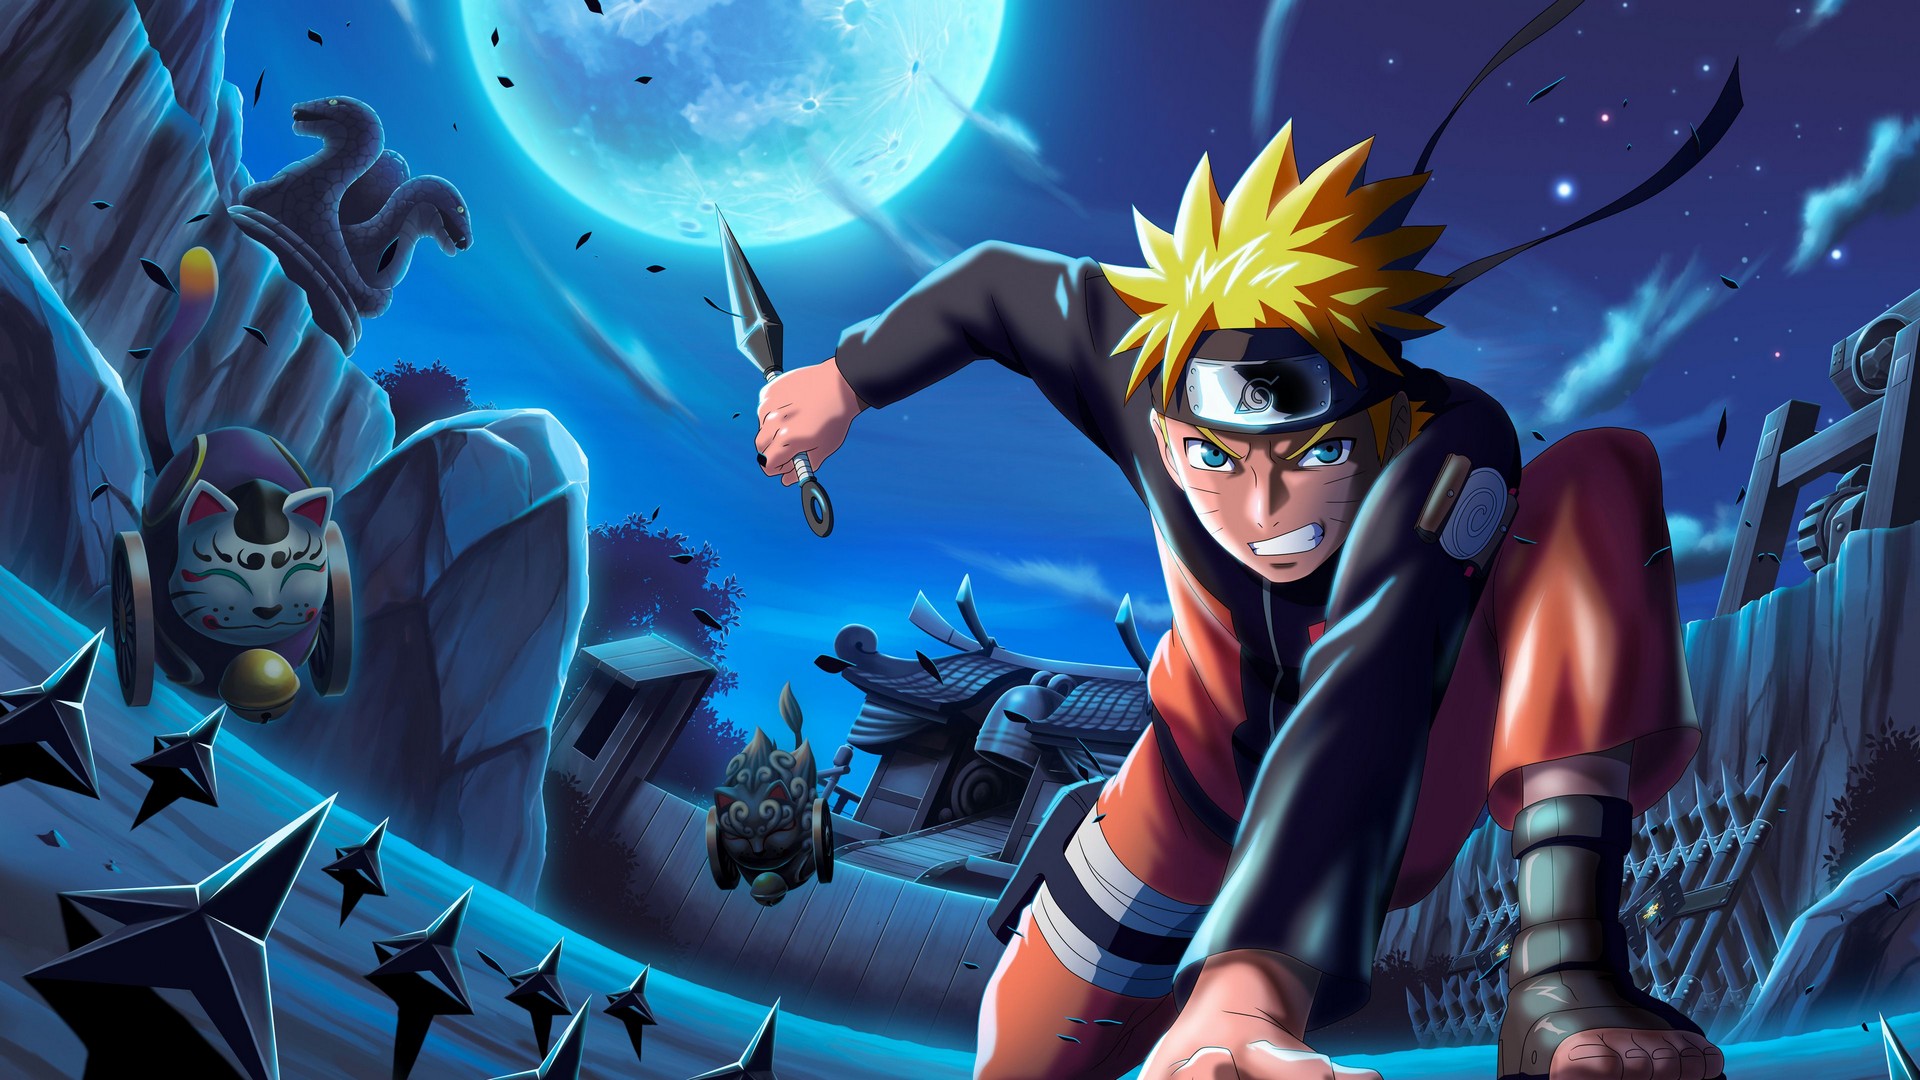 Naruto Poster HD Wallpaper with high-resolution 1920x1080 pixel. You can use this poster wallpaper for your Desktop Computers, Mac Screensavers, Windows Backgrounds, iPhone Wallpapers, Tablet or Android Lock screen and another Mobile device